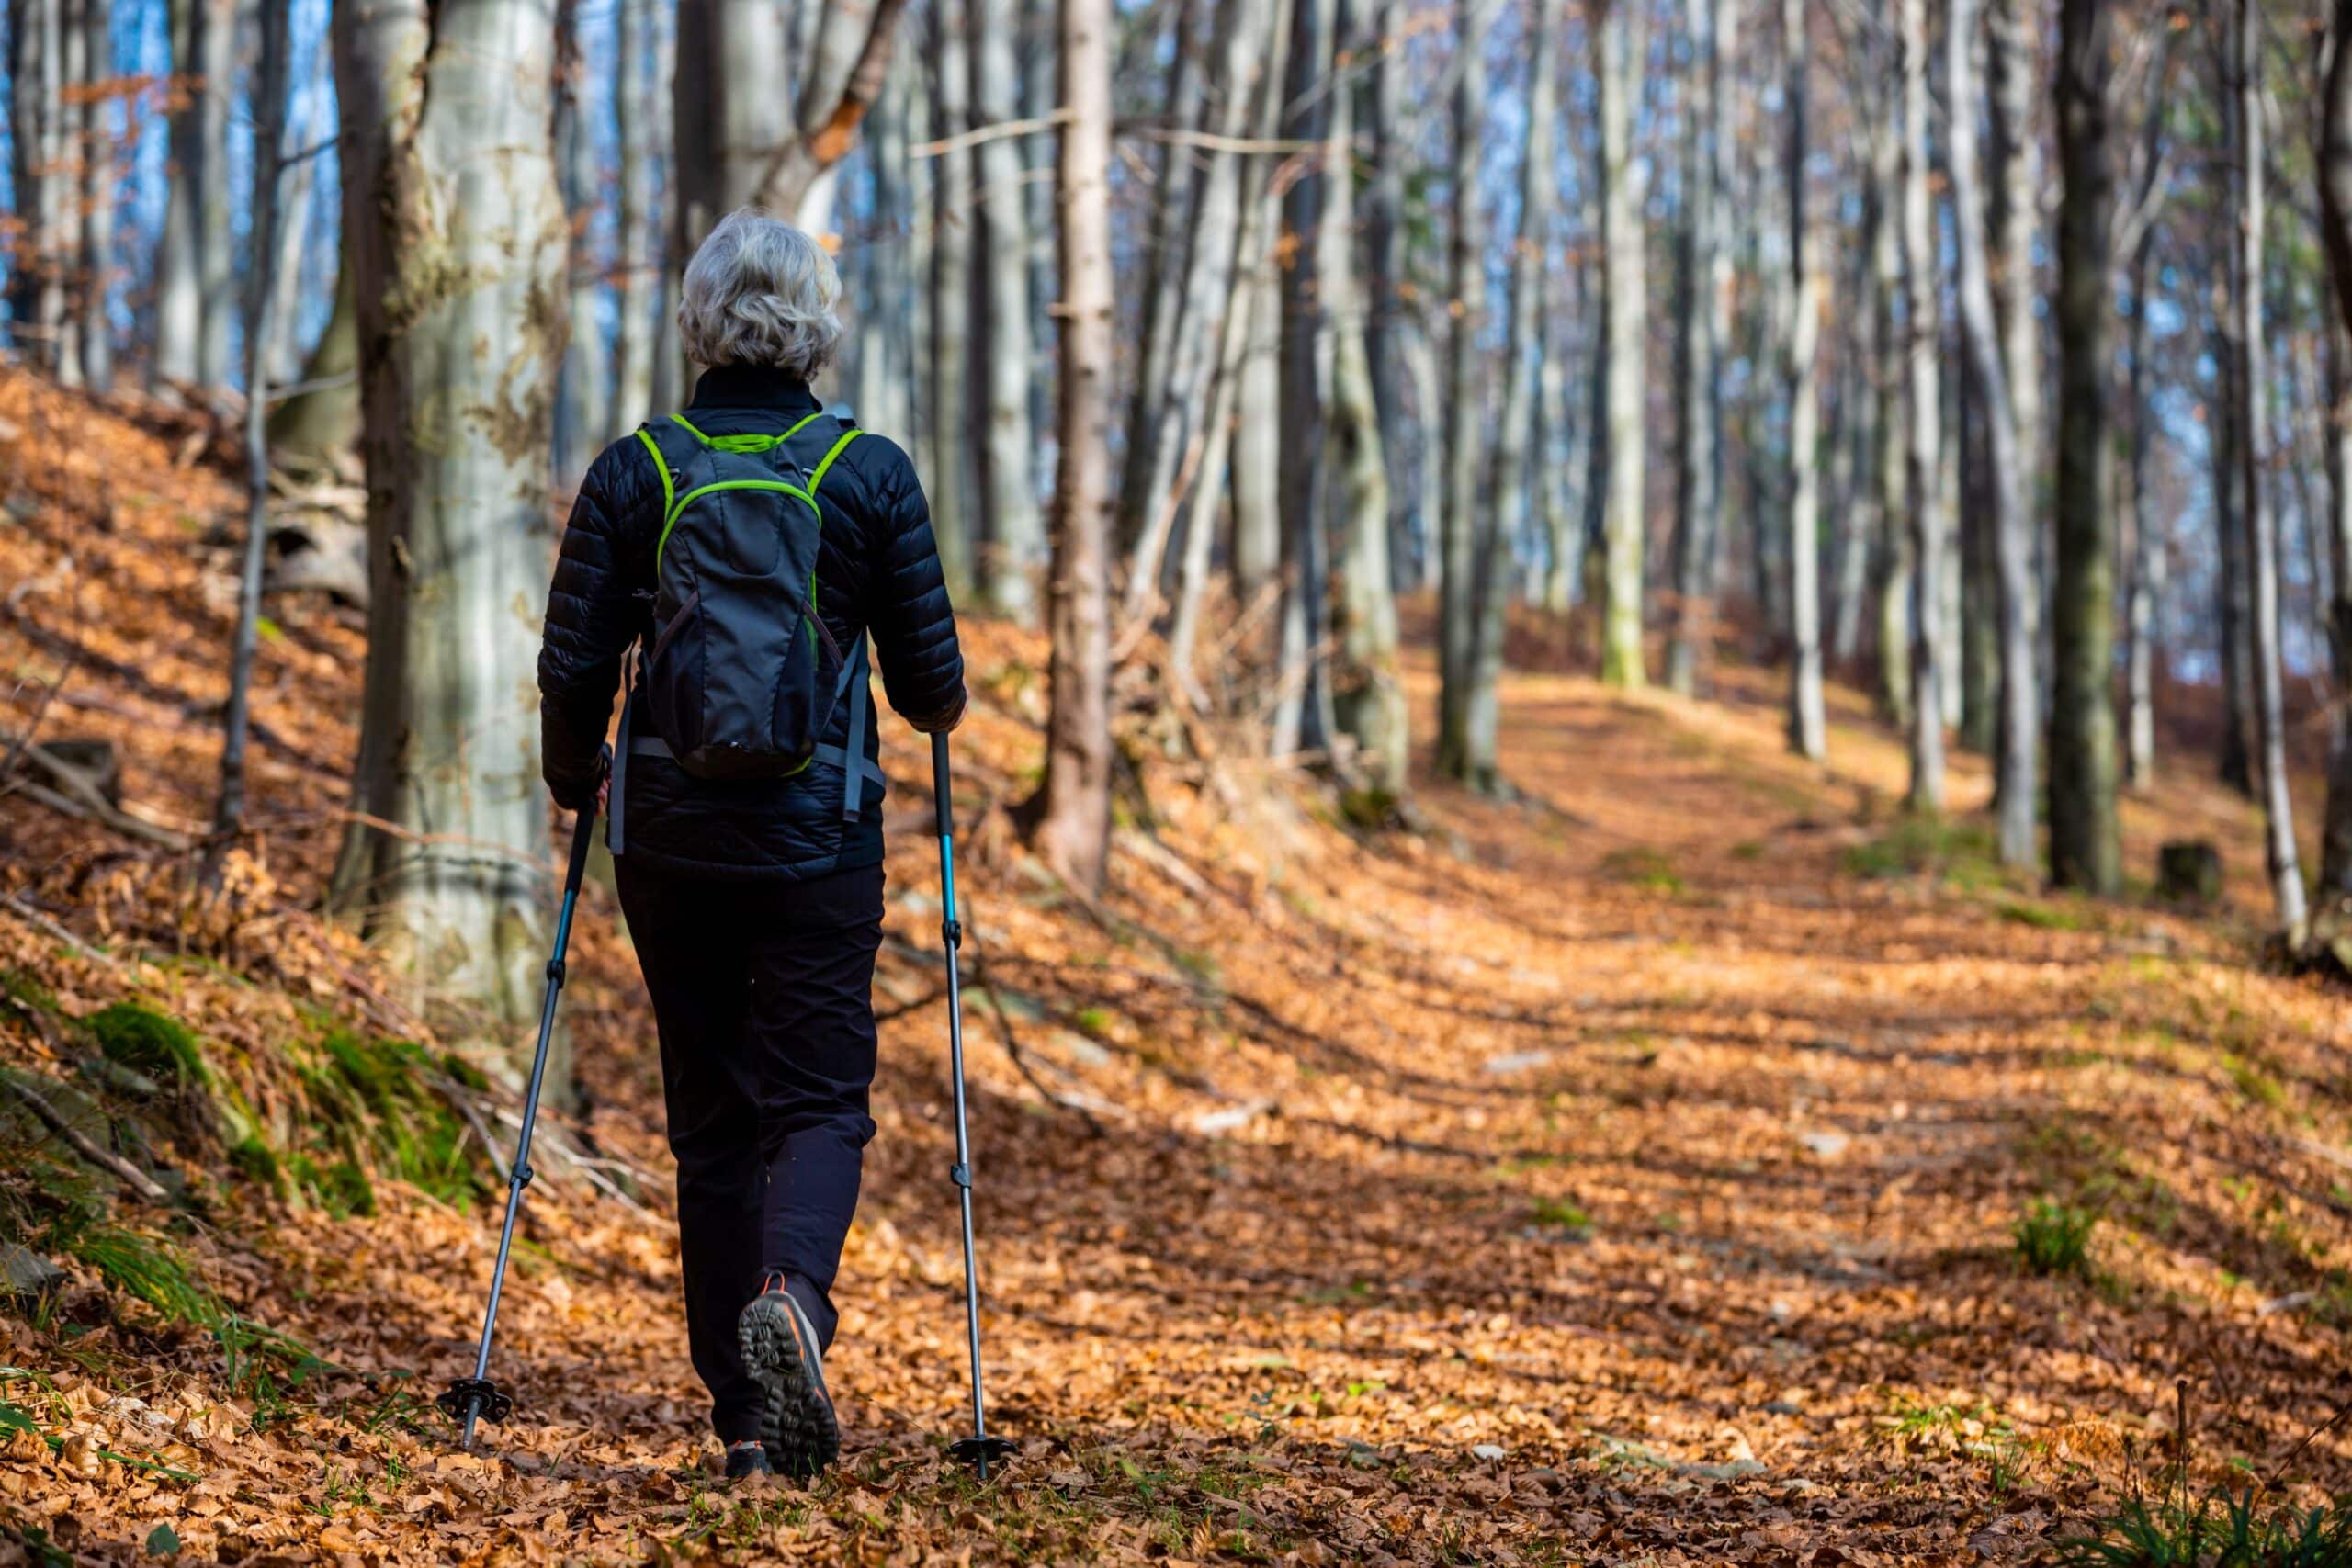 Walking fitness can predict fracture risk in older adults